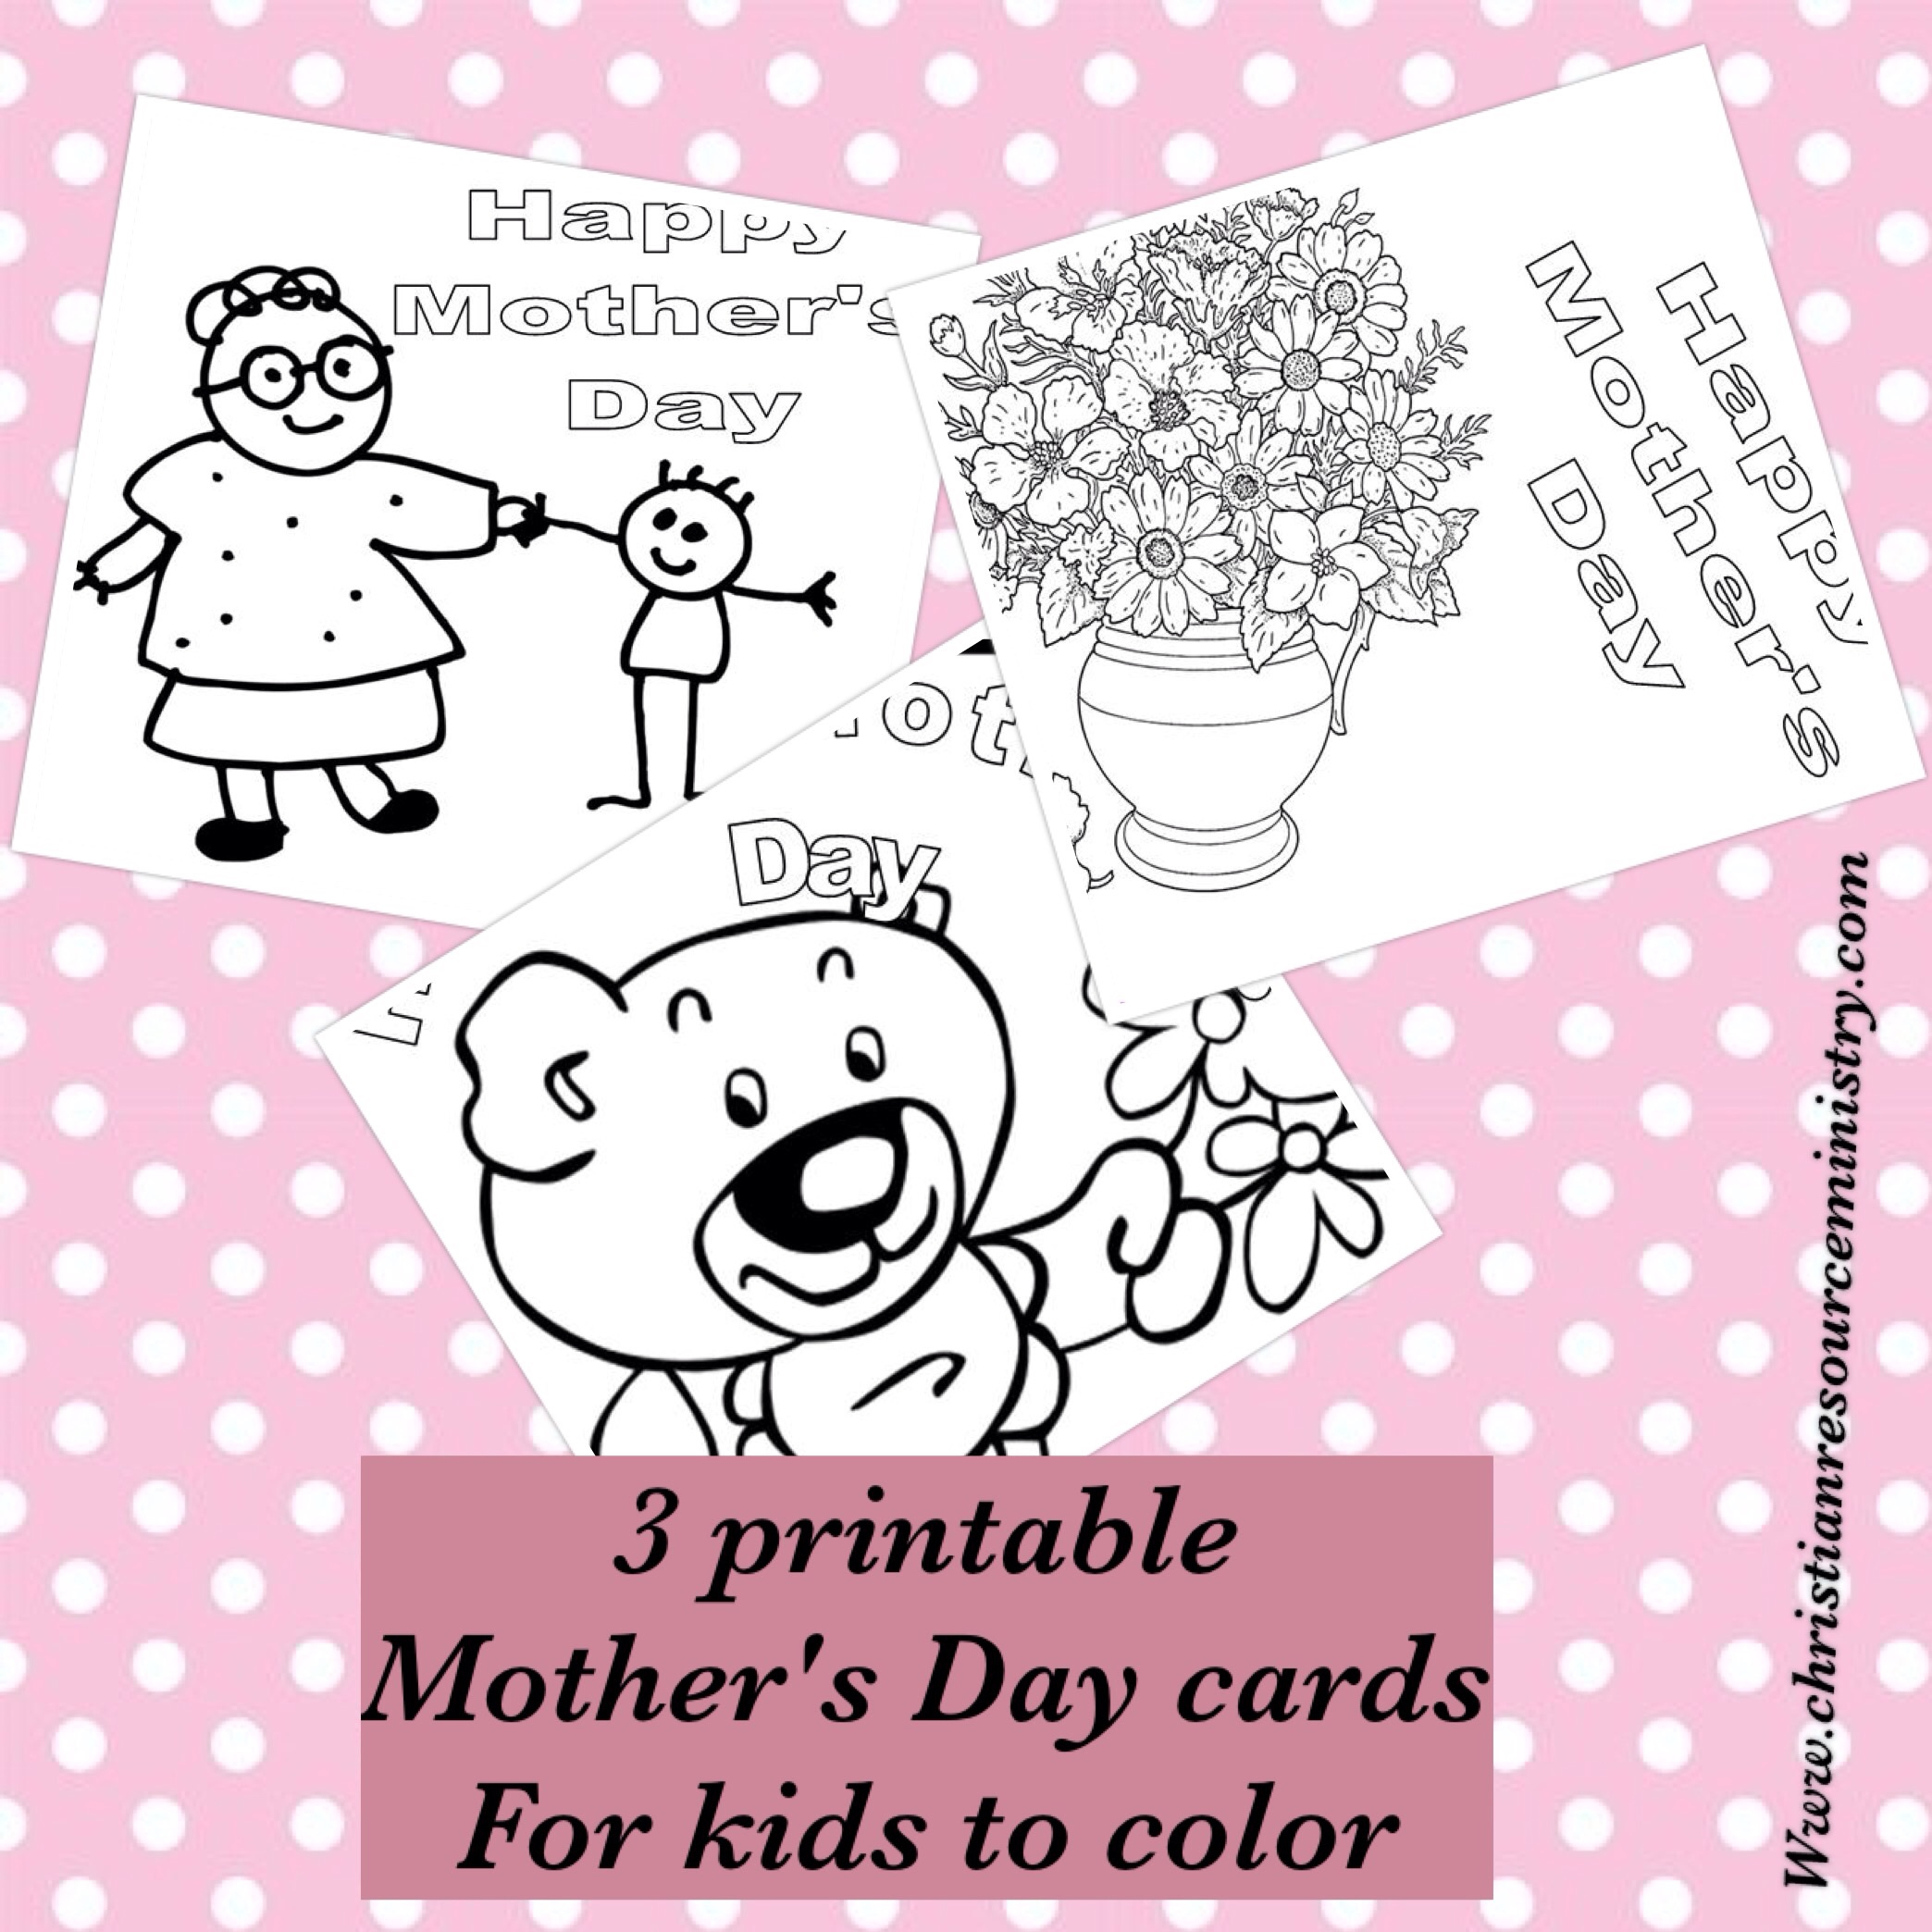 Free Printable Christian Cards For All Occasions - Free Printable Cards For All Occasions